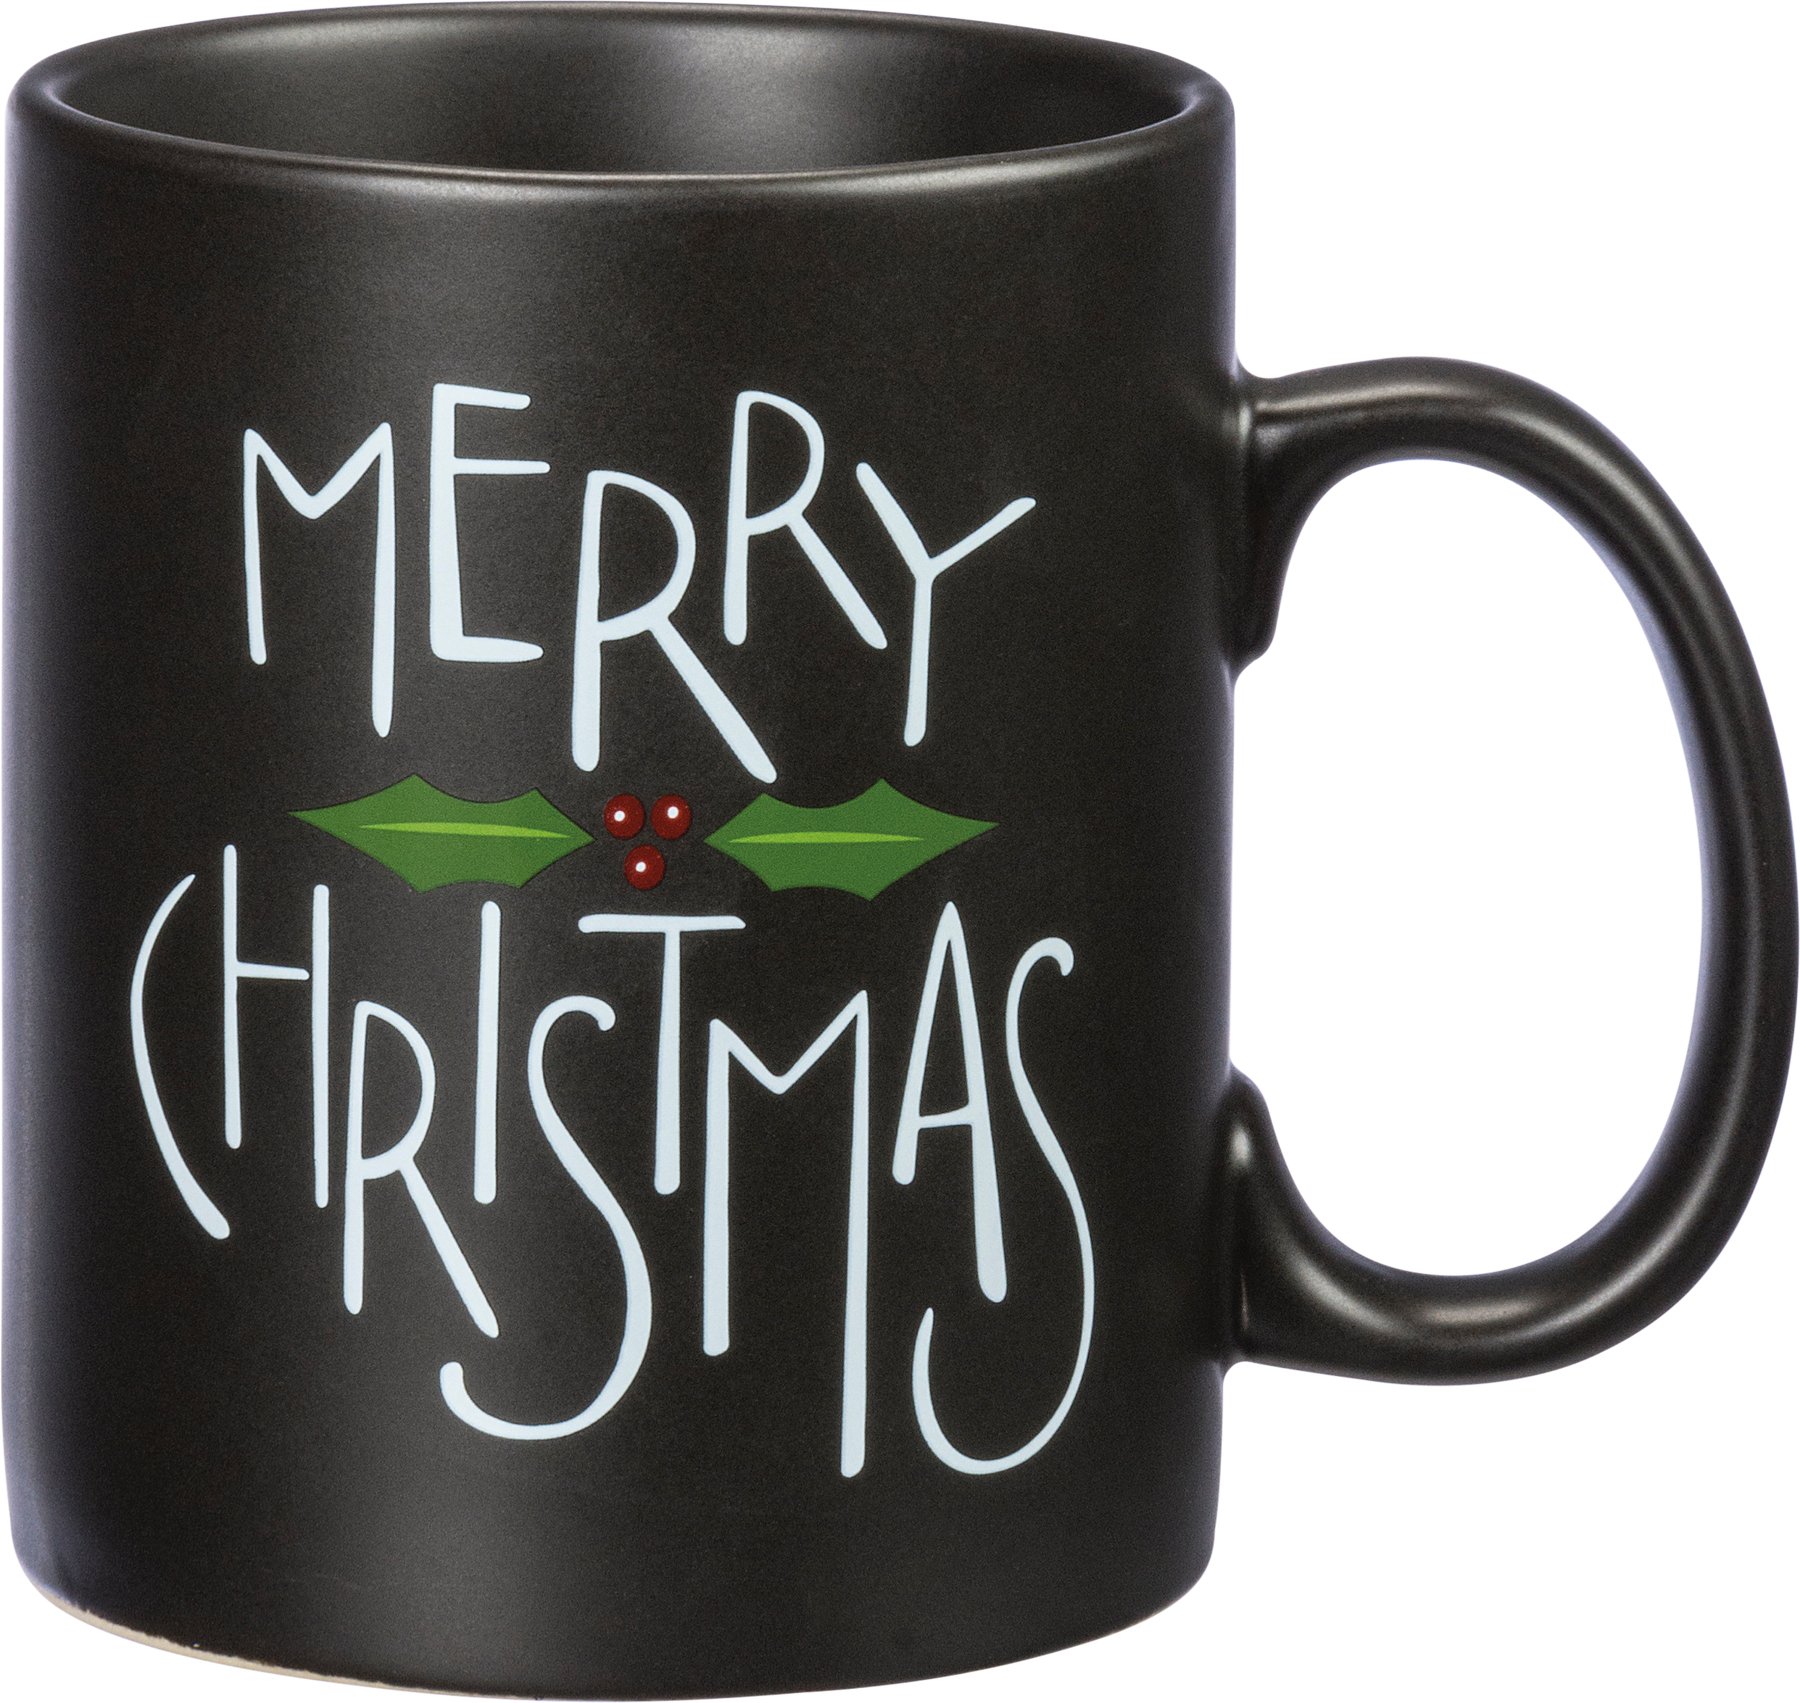 15-Ounce Tree-Free Greetings 45854 Youve Been Warned Ceramic Mug with Full-Sized Handle 